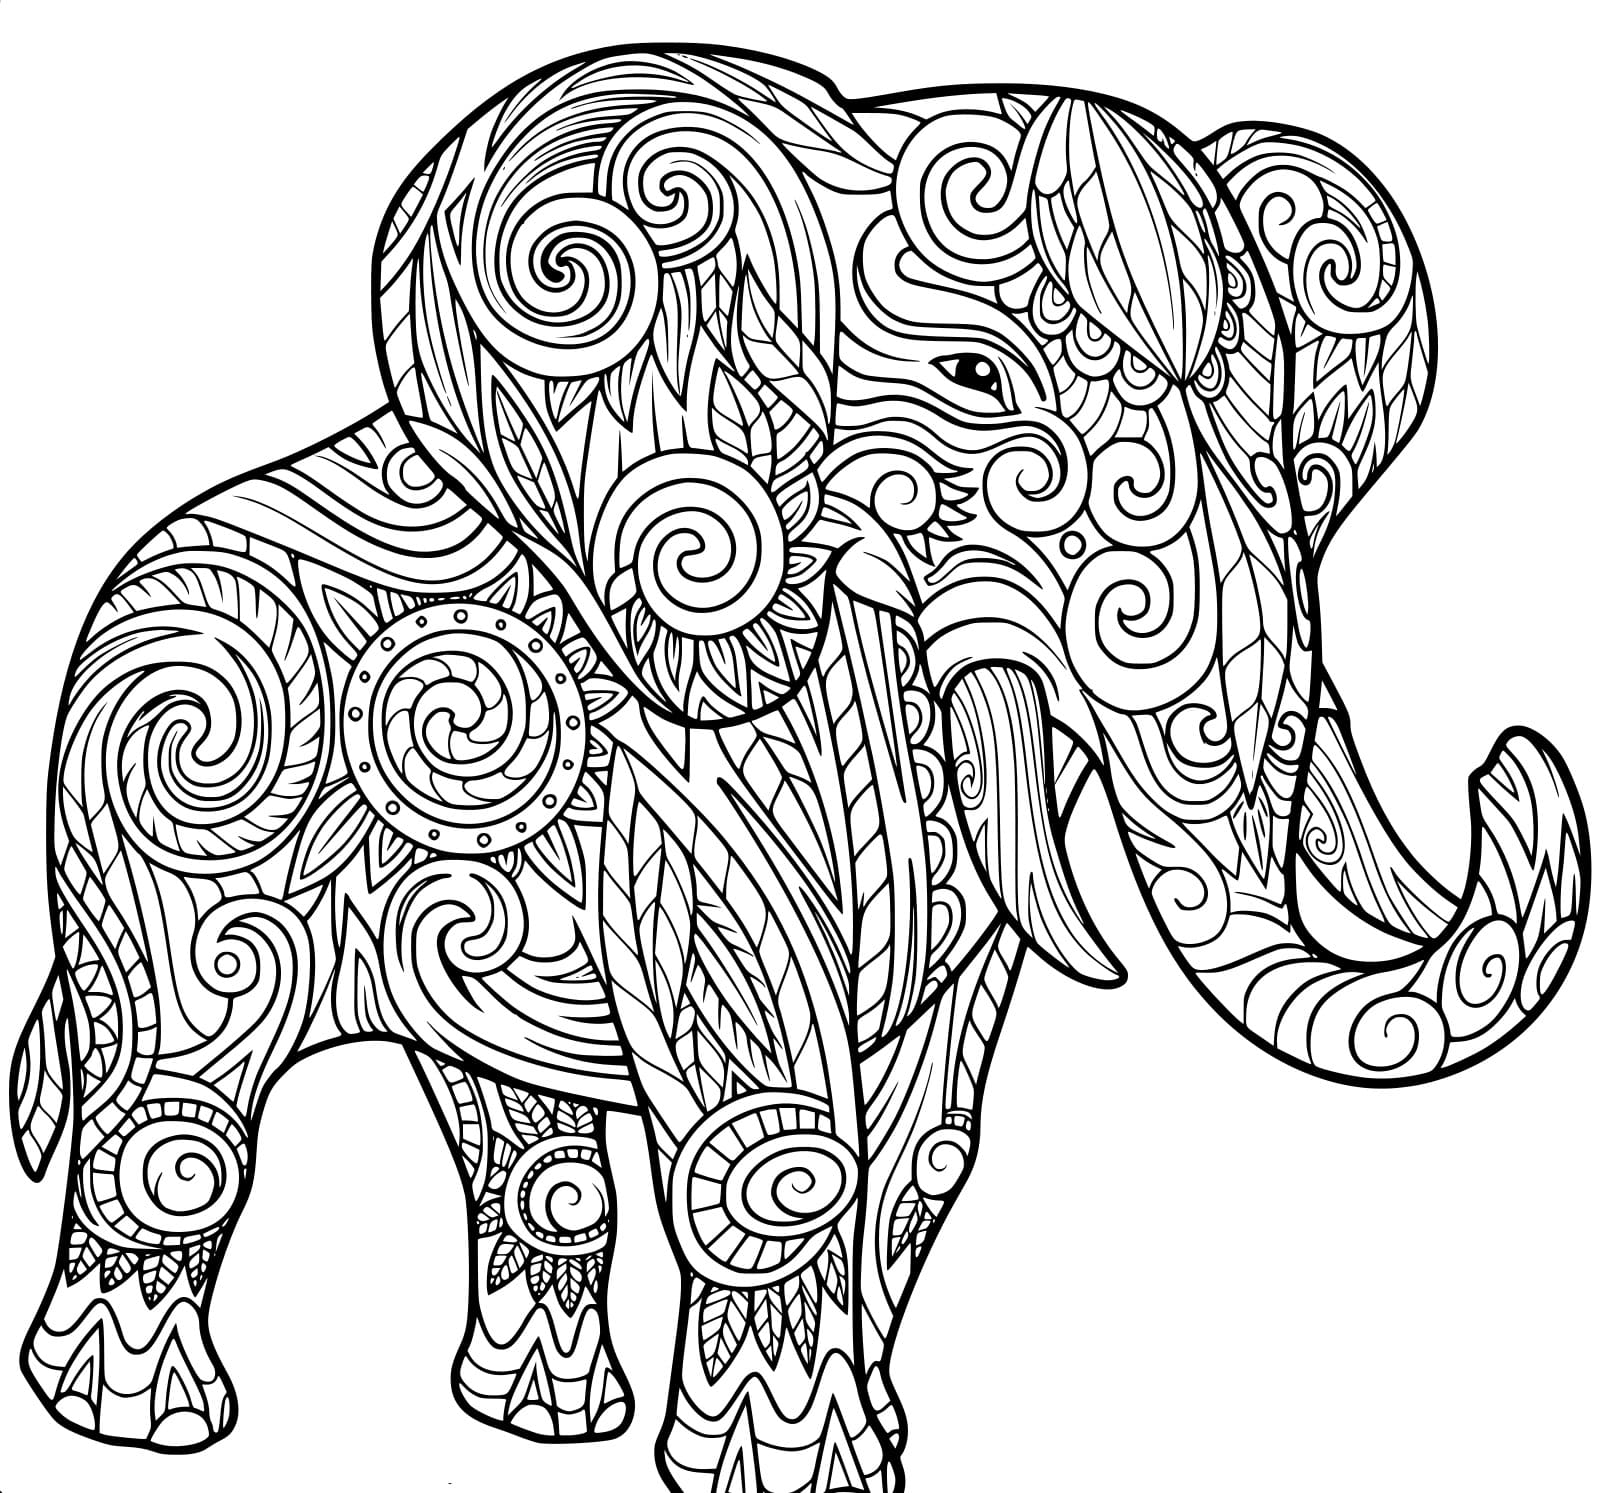 Invest Center home coloring pages to print of animals Ten years ...